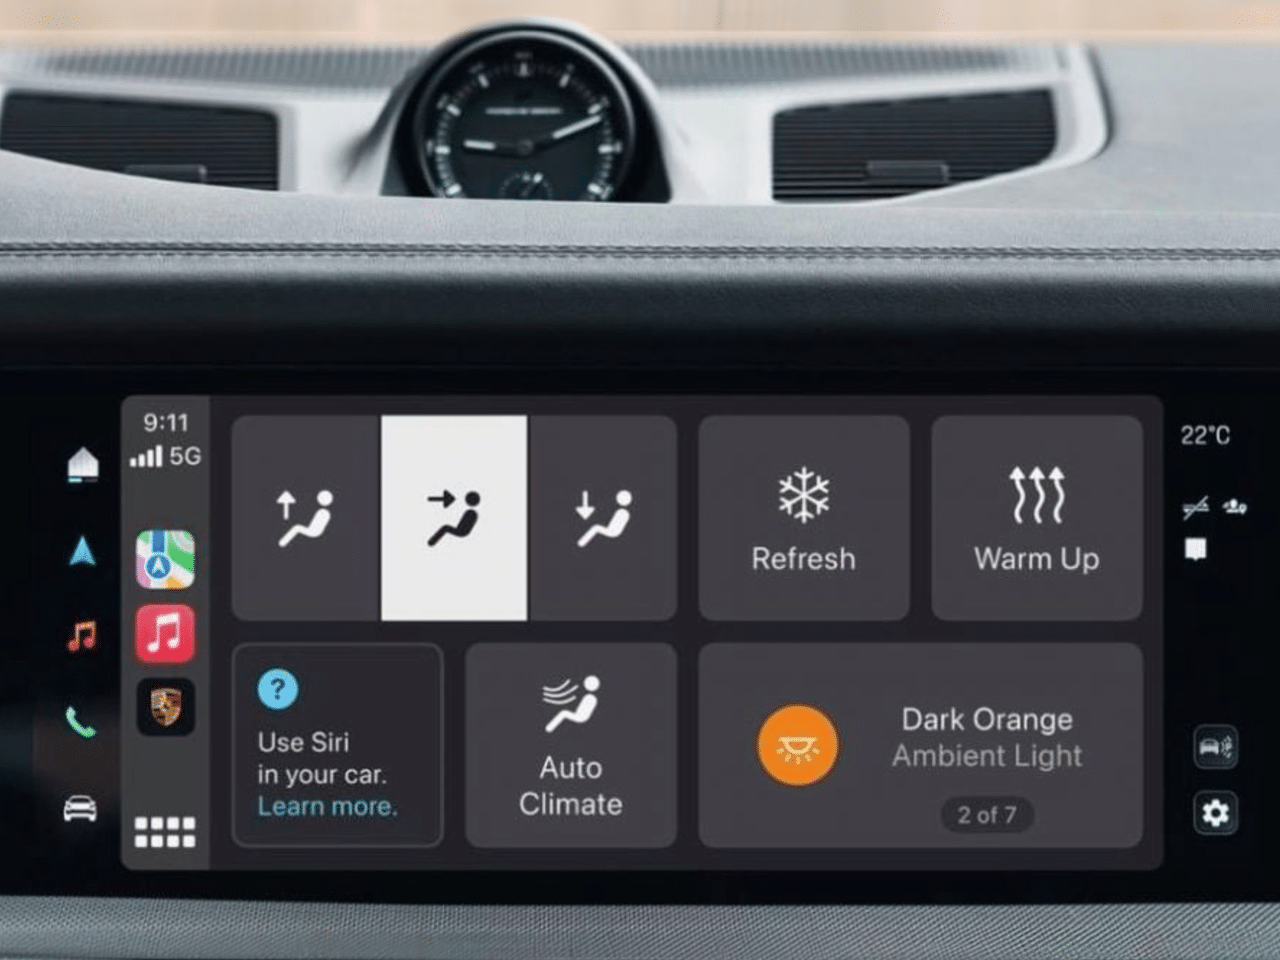 Porsche Gives Apple CarPlay Users More Control with New Update